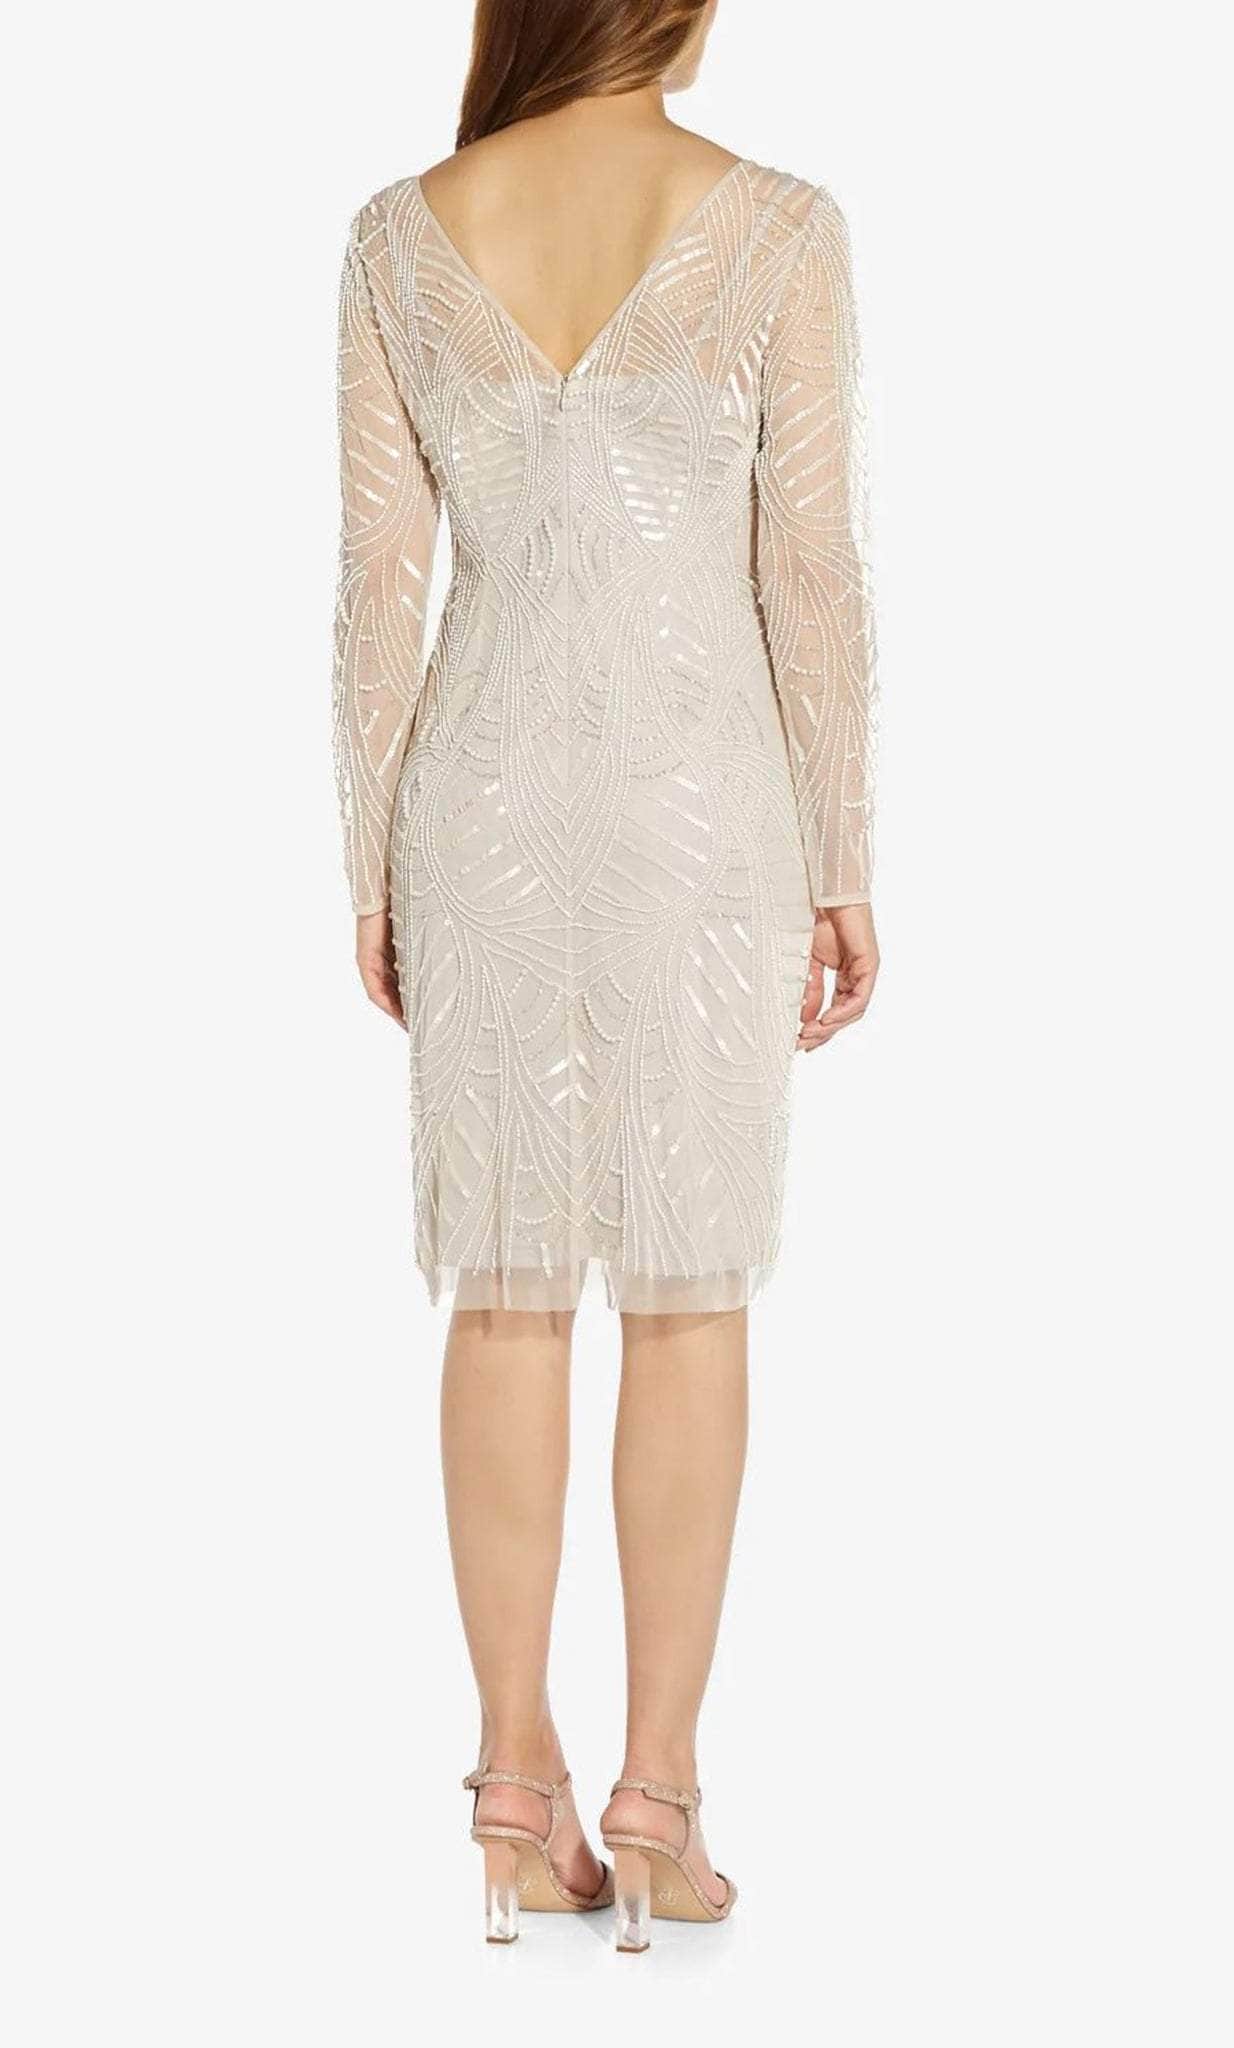 Adrianna Papell AP1E208662 - Long Sleeve Illusion Cocktail Dress Cocktail Dresses